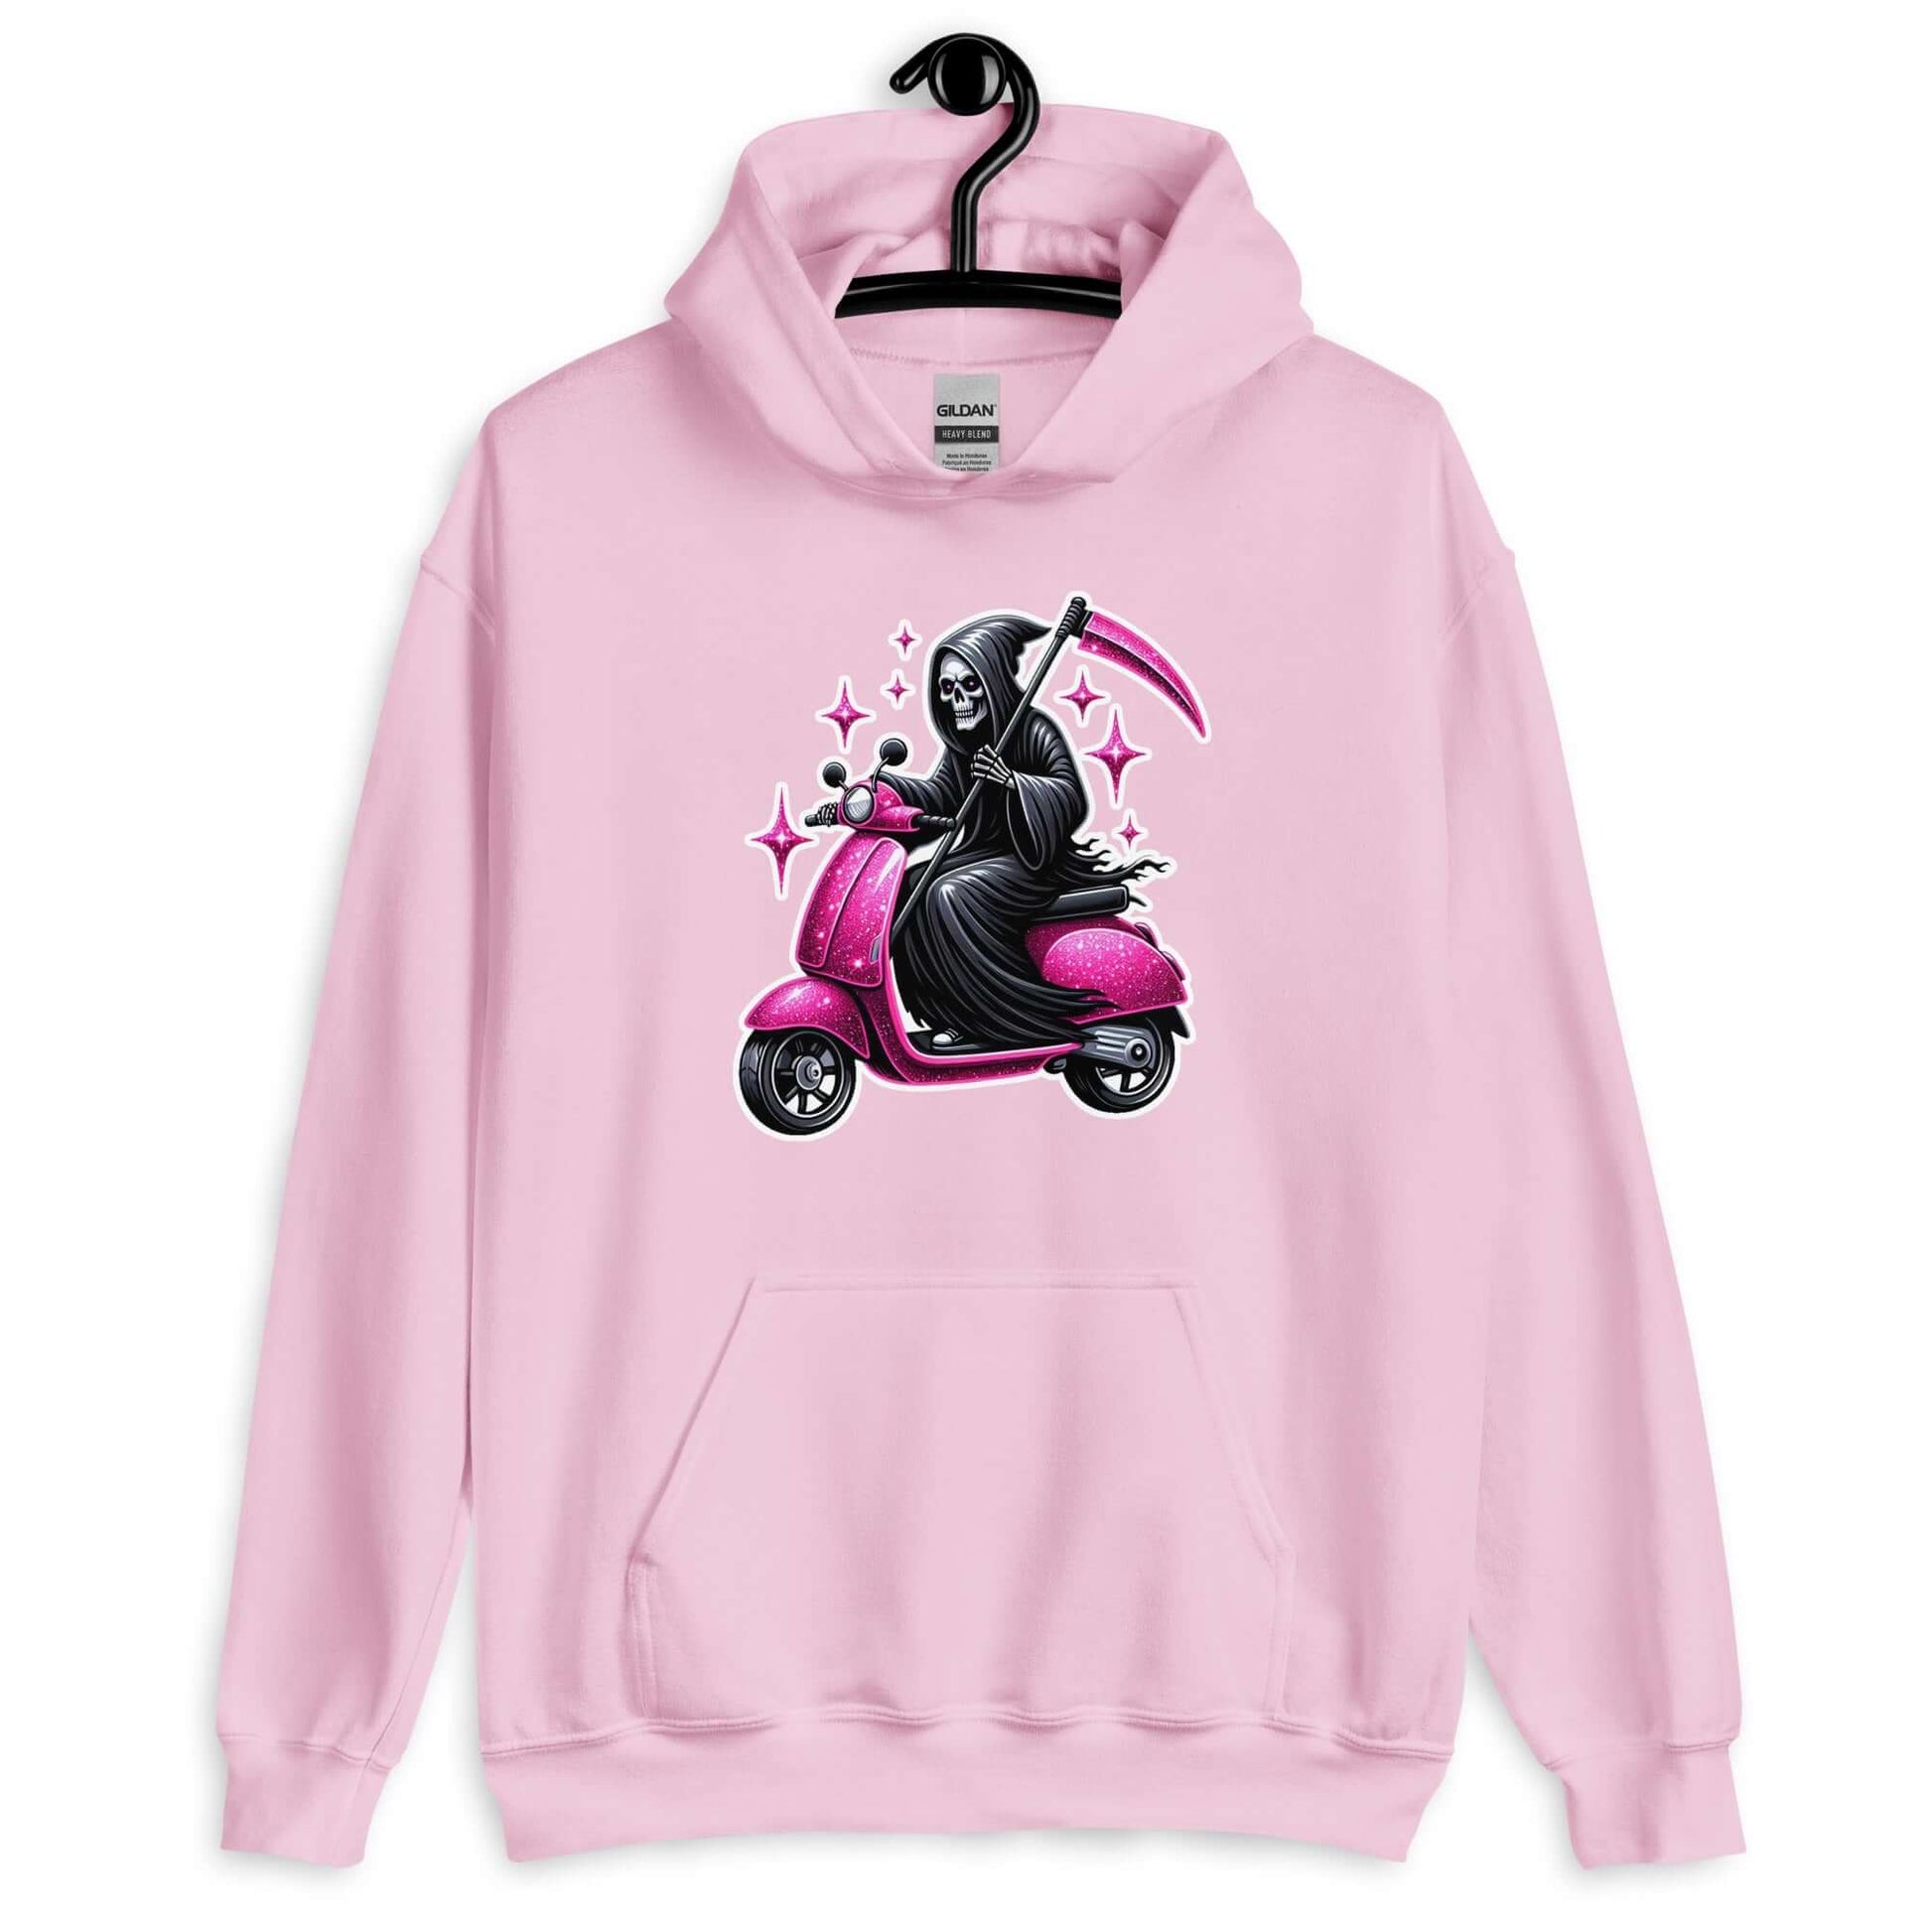 Light pink hoodie sweatshirt with funny image of the Grim Reaper riding on a glam pink scooter printed on the front.